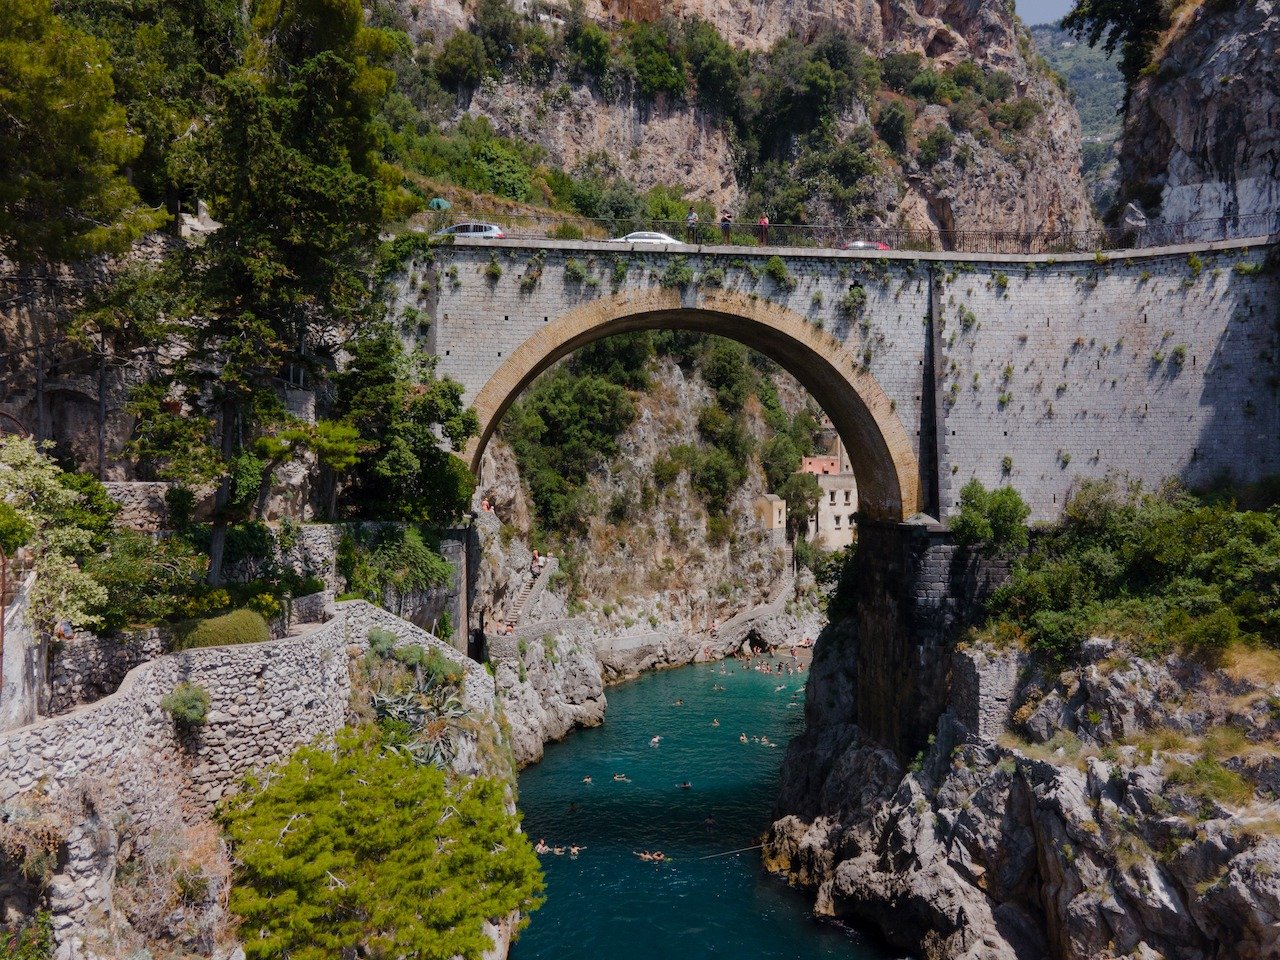 📍 Fiordo di Furore, Amalfi Coast, Italy

Quite possibly one of the coolest beach settings I have ever been to. Get here early if you want a decent spot and to beat most of the crowds. This beach is perched just behind this bridge along the Amalfi Co